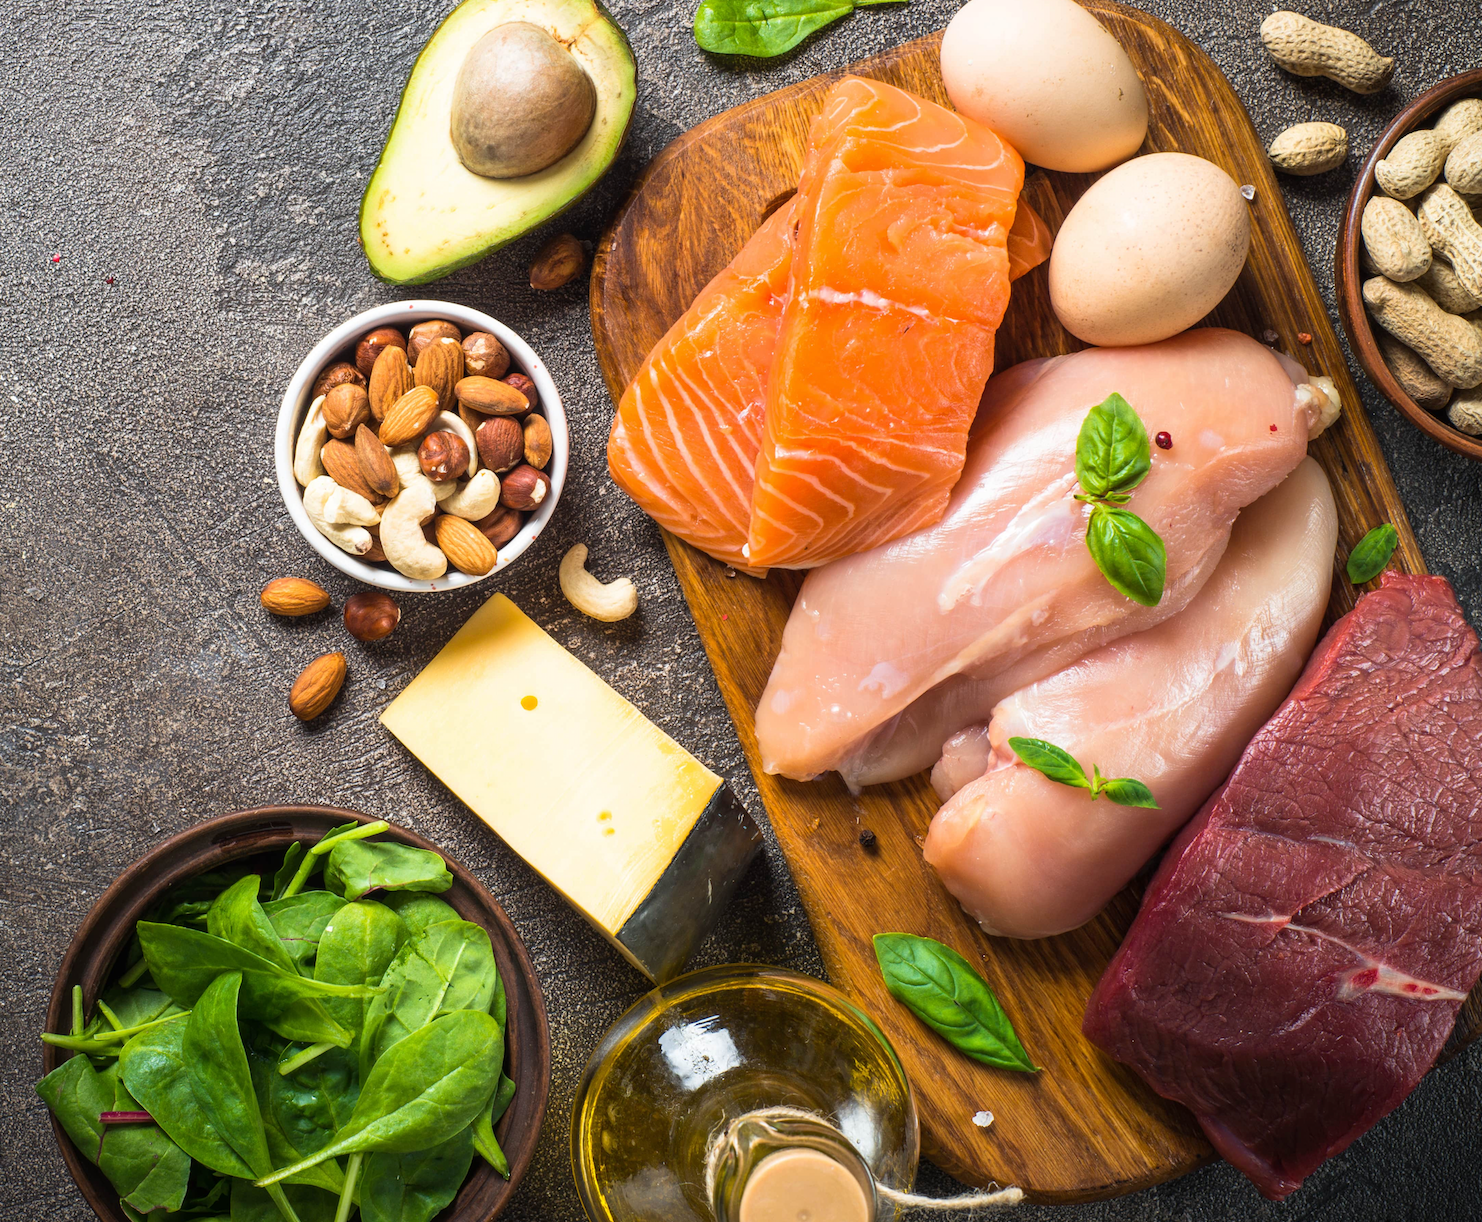 Become a Fat Burning Machine with these Keto Diet Plans Delivered to You